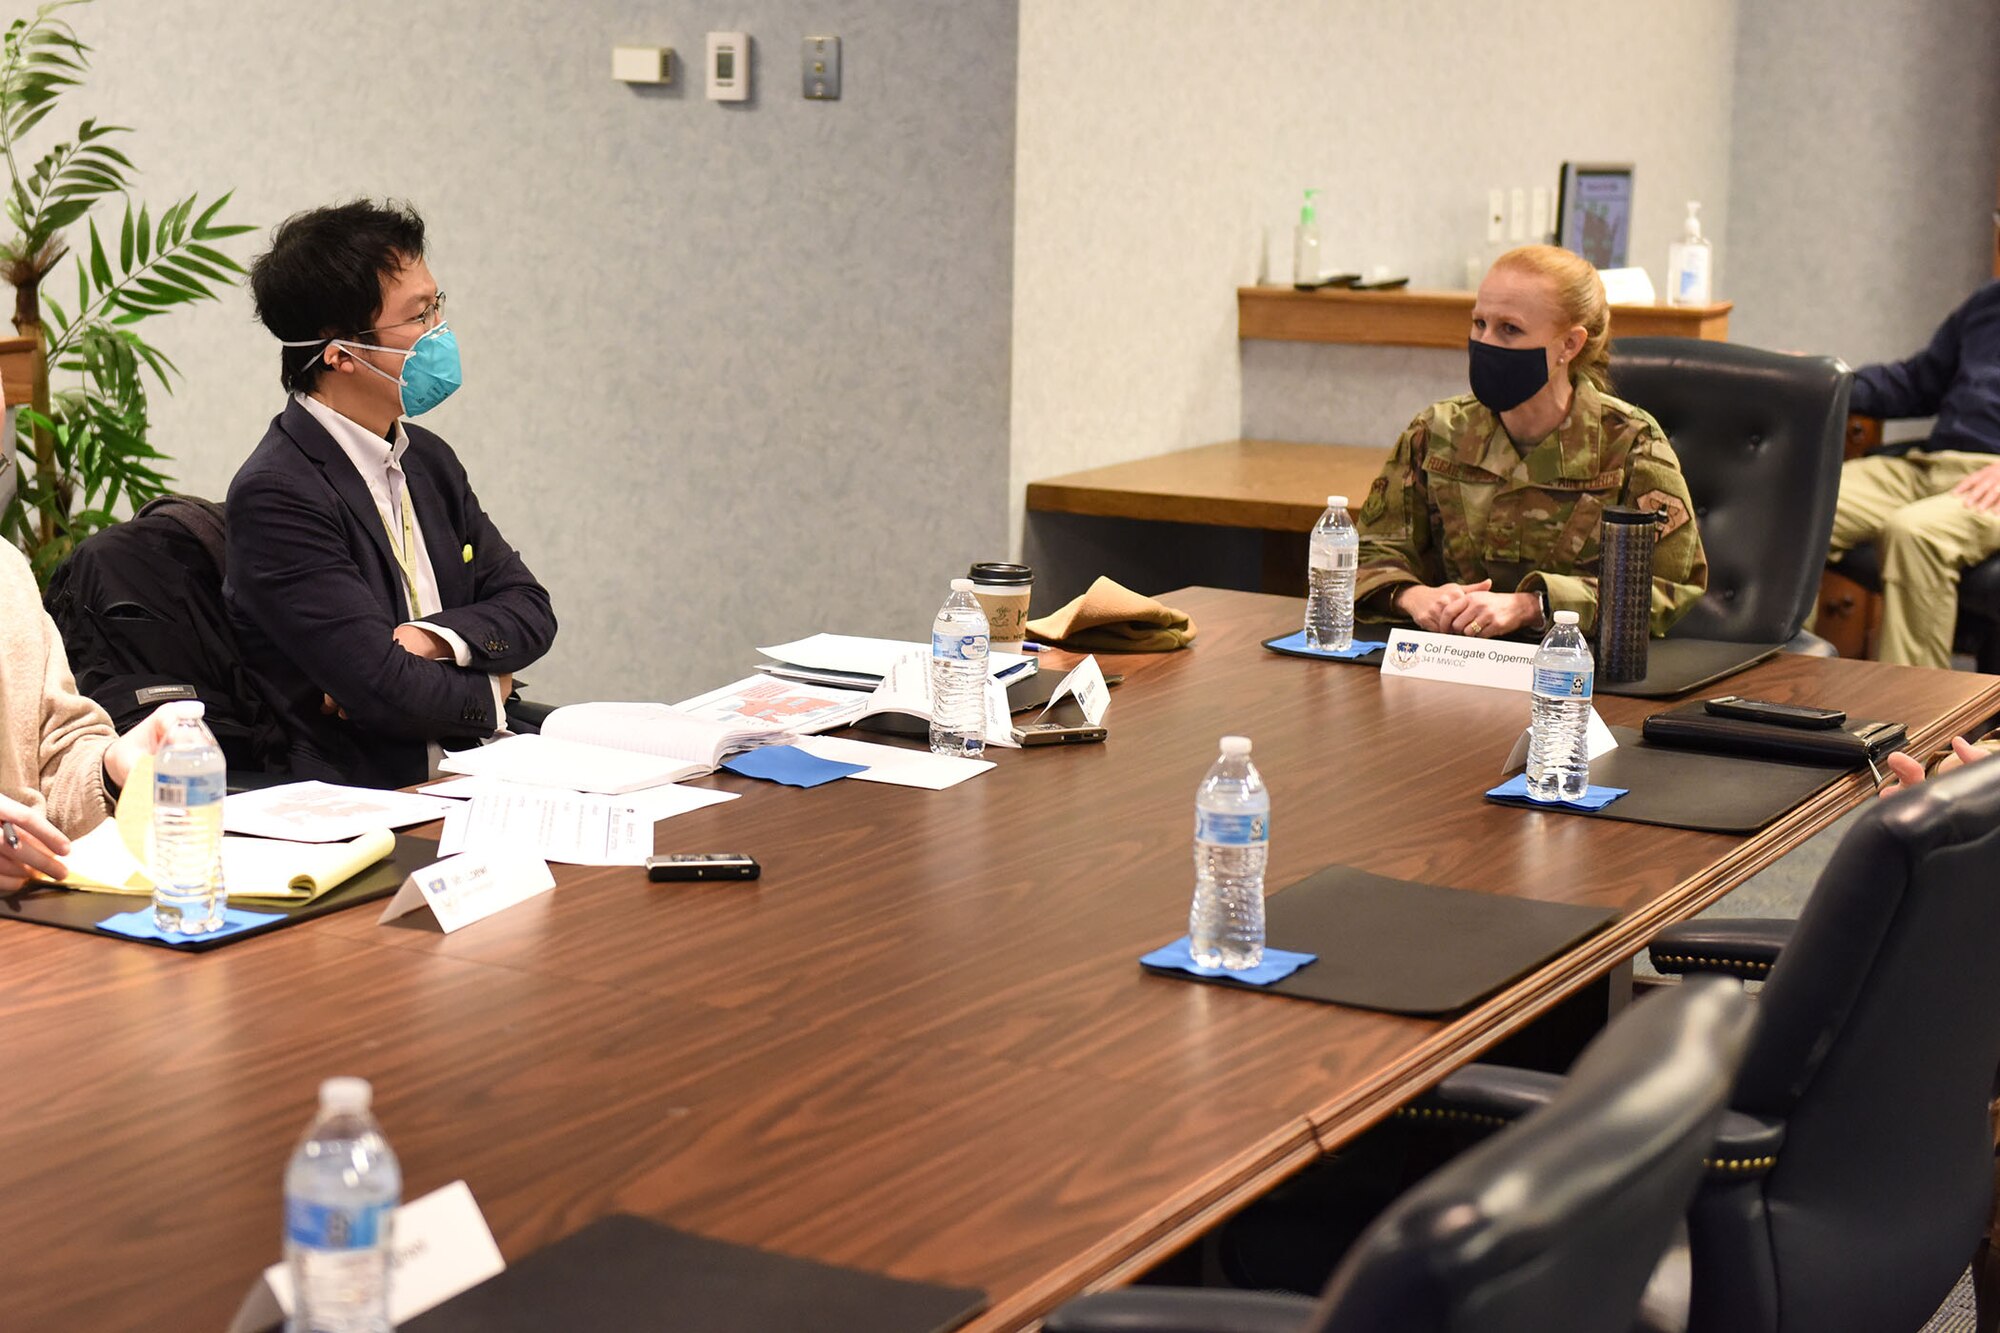 Mr. Takashi Watanabe and Col. Anita Feugate Opperman, 341st Missile Wing commander, sit at a table and discuess the mission brief before the media tour is conducted.